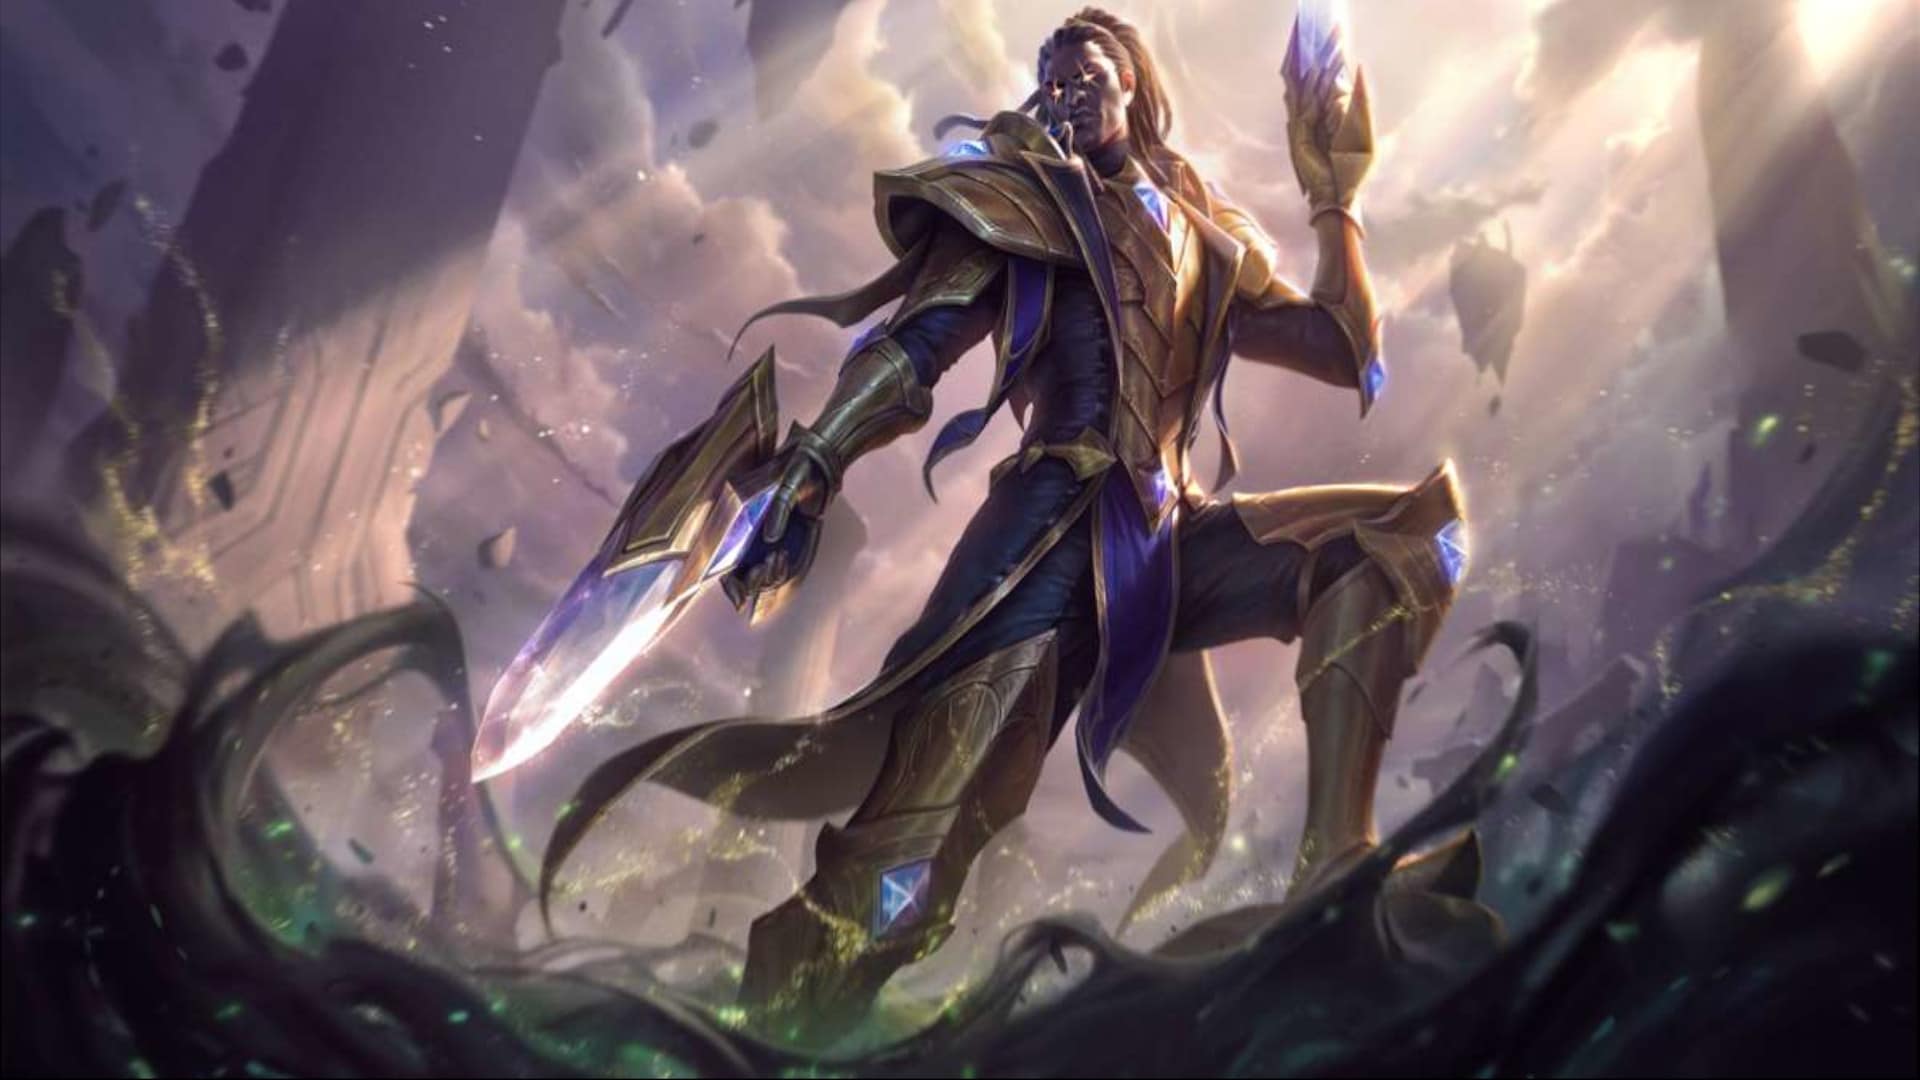 End of Season Rewards For League of Legends Season 10 To Be Distributed Soon